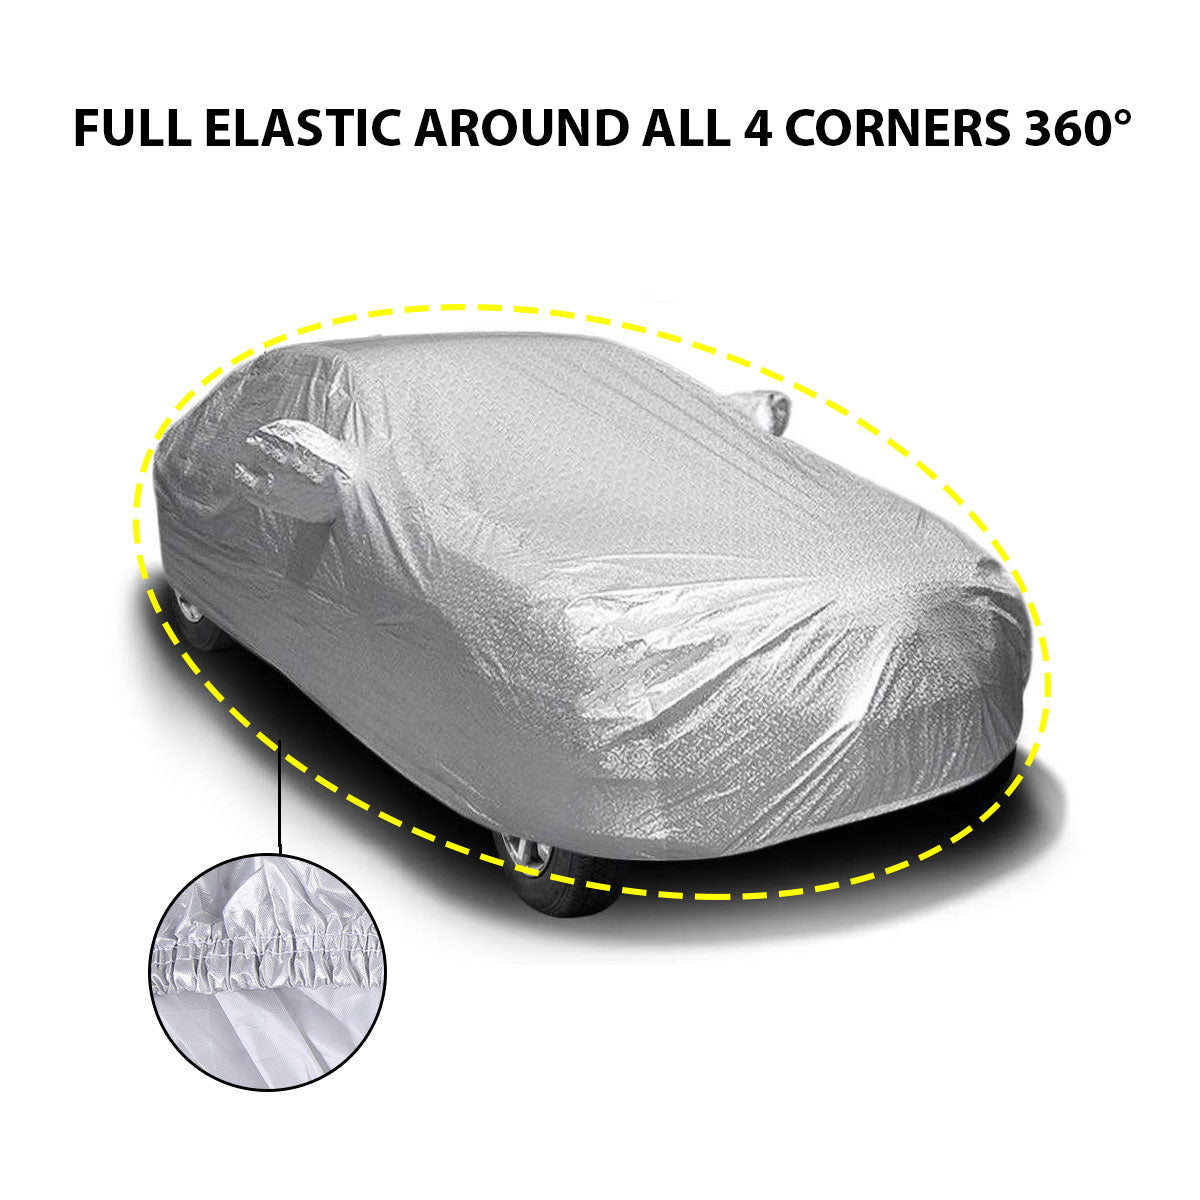 Oshotto Spyro Silver Anti Reflective, dustproof and Water Proof Car Body Cover with Mirror Pockets For Hyundai Verna Fluidic